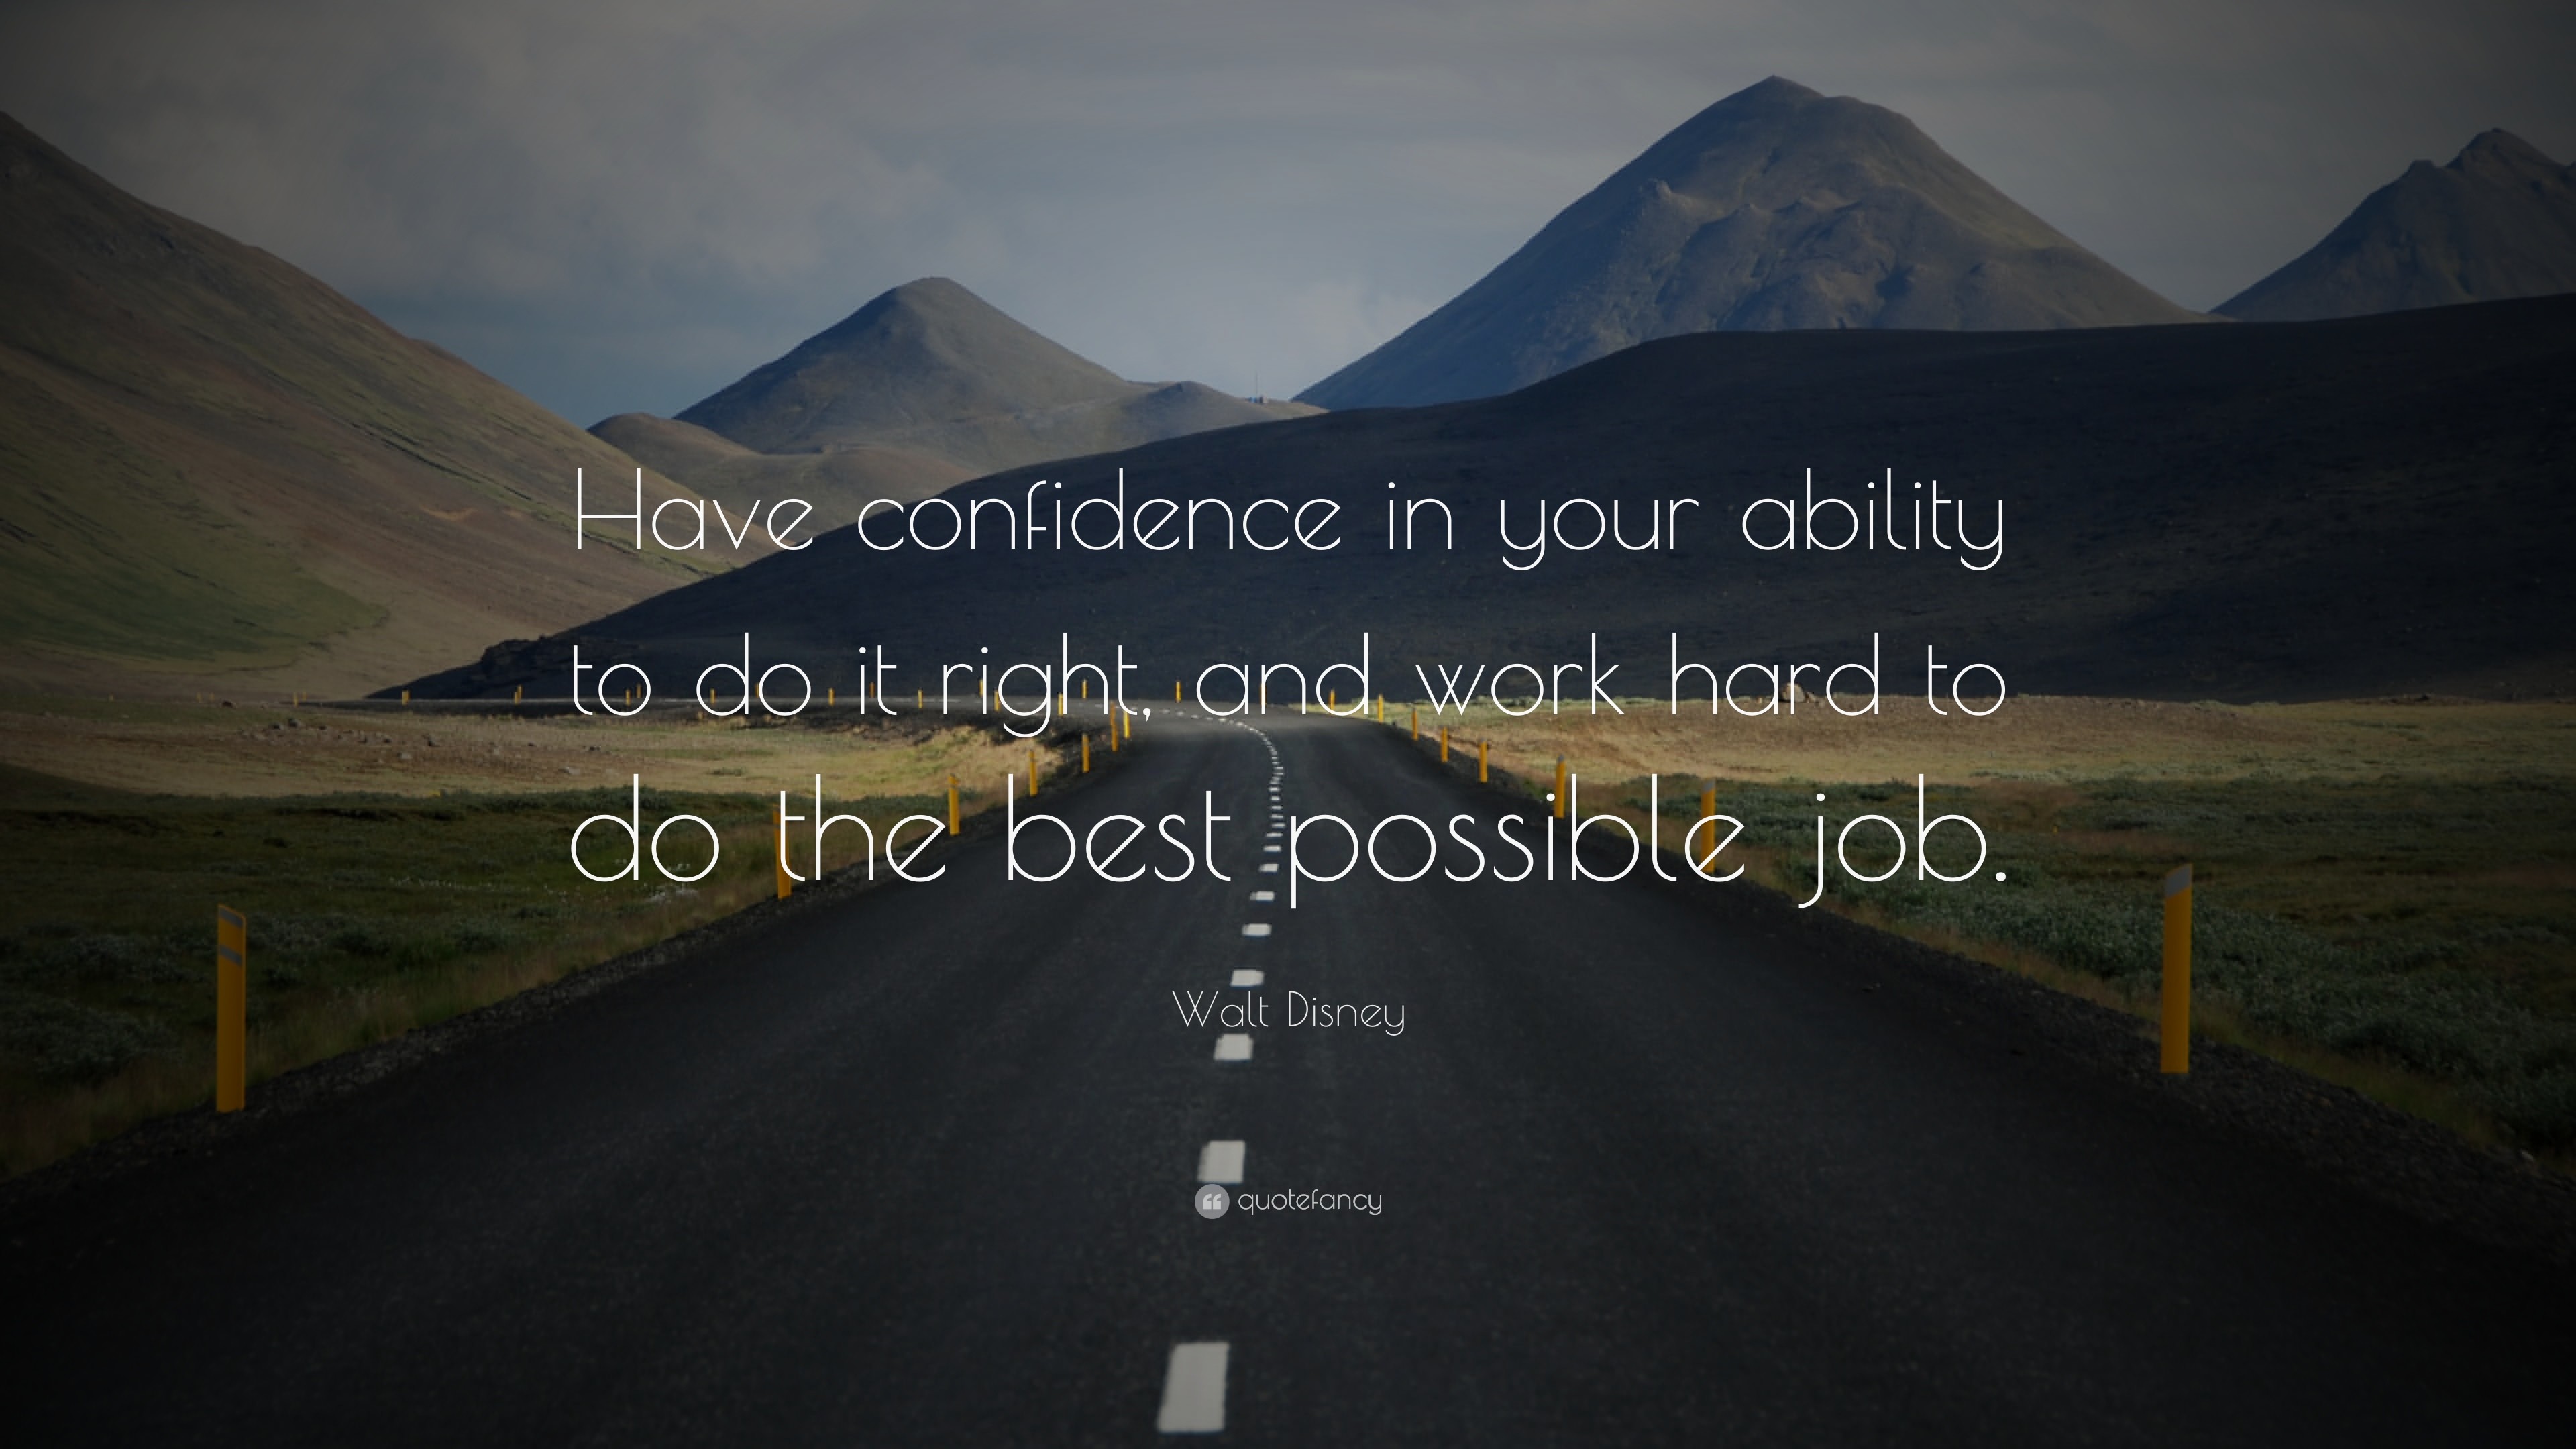 Walt Disney Quote Have confidence in your ability to do it right, and